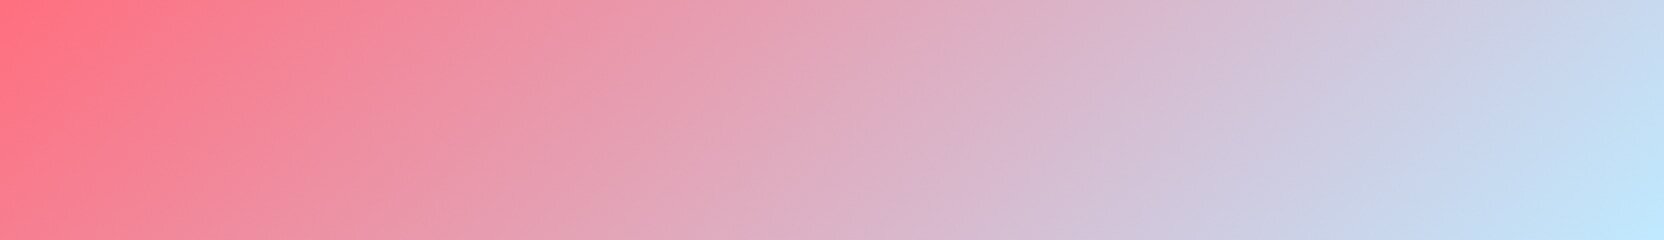 An image of a pink and blue gradient background.